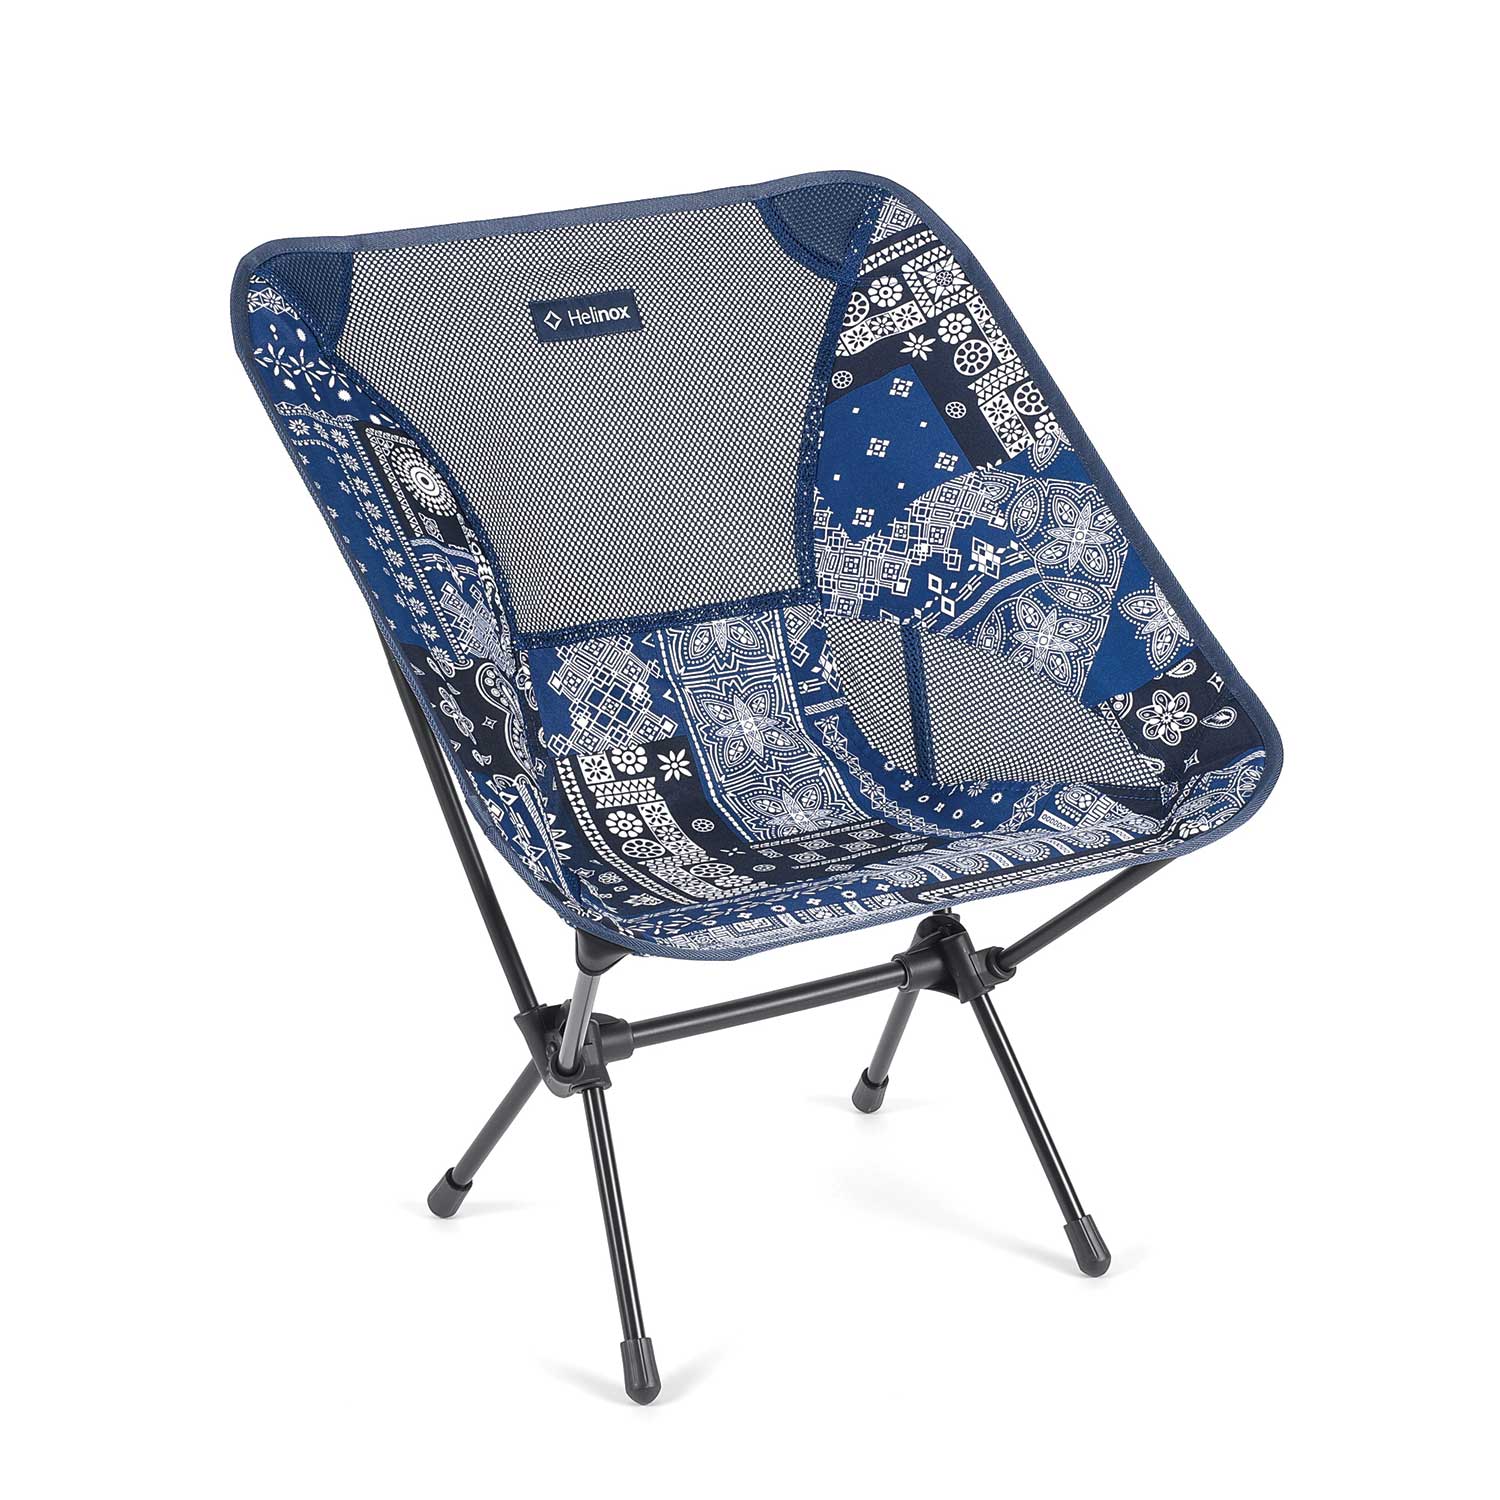 Chair One By Helinox Boundary Waters Catalog